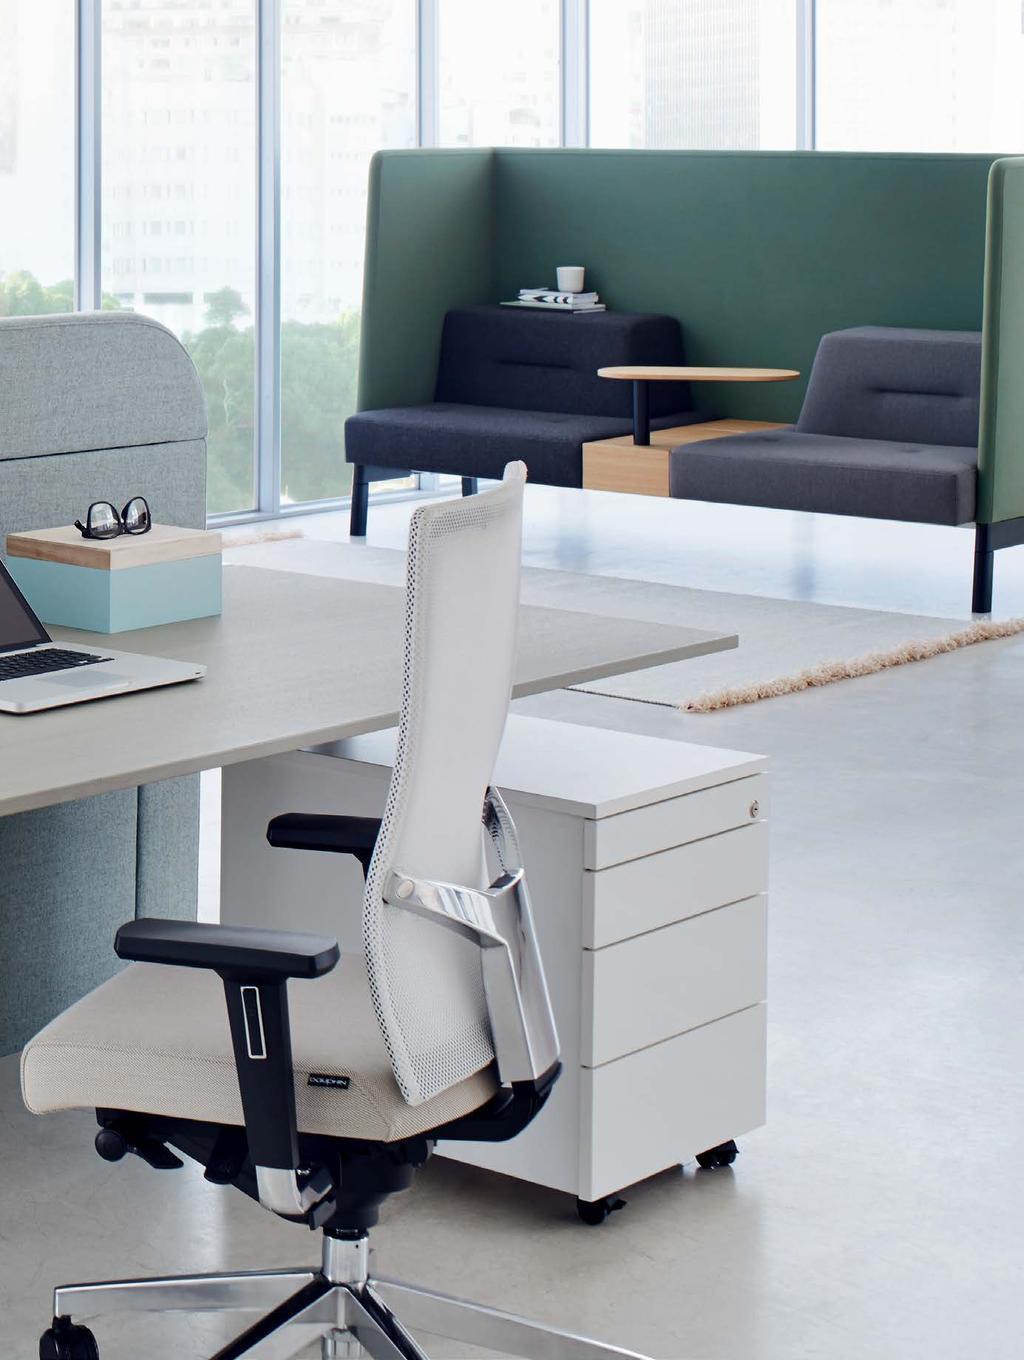 Mobile container, CN series work desk system, ophelis docks two-seater 45 1 1: Removable material tray 2: Sealing